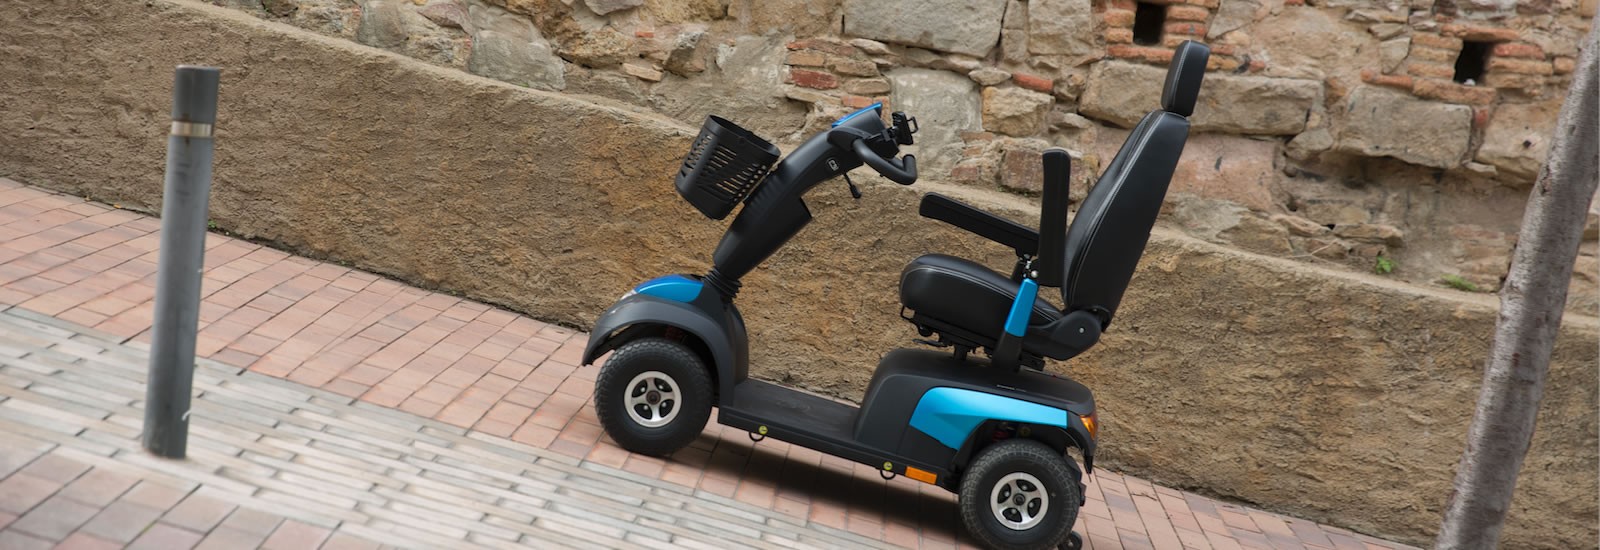 Funchal Mobility Scooter for cruise ship passengers